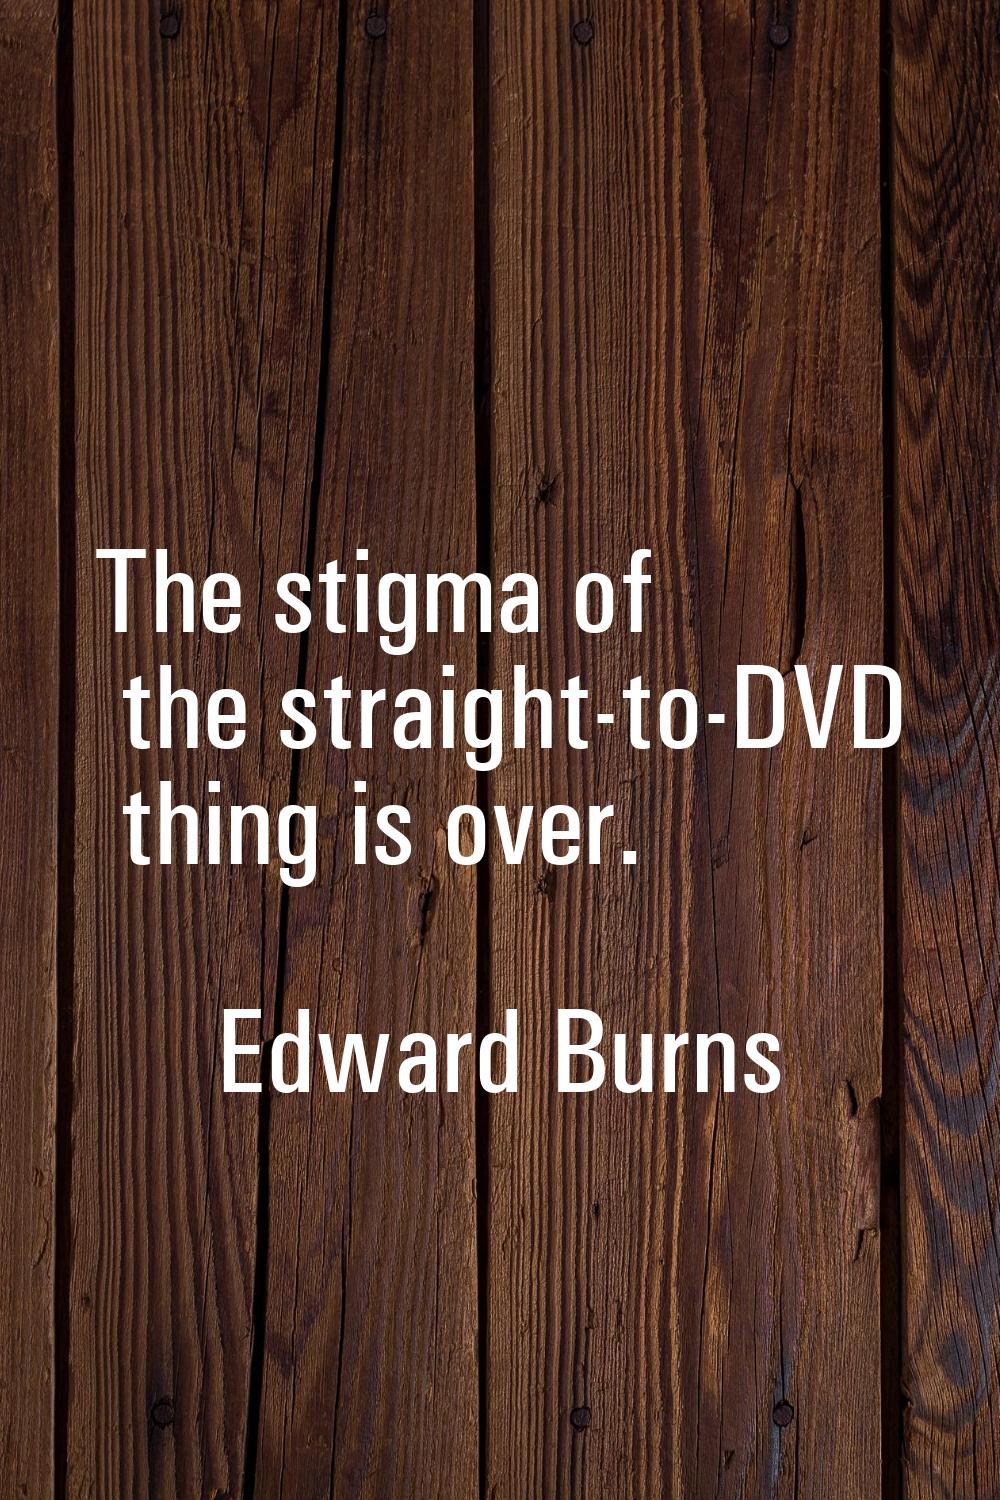 The stigma of the straight-to-DVD thing is over.